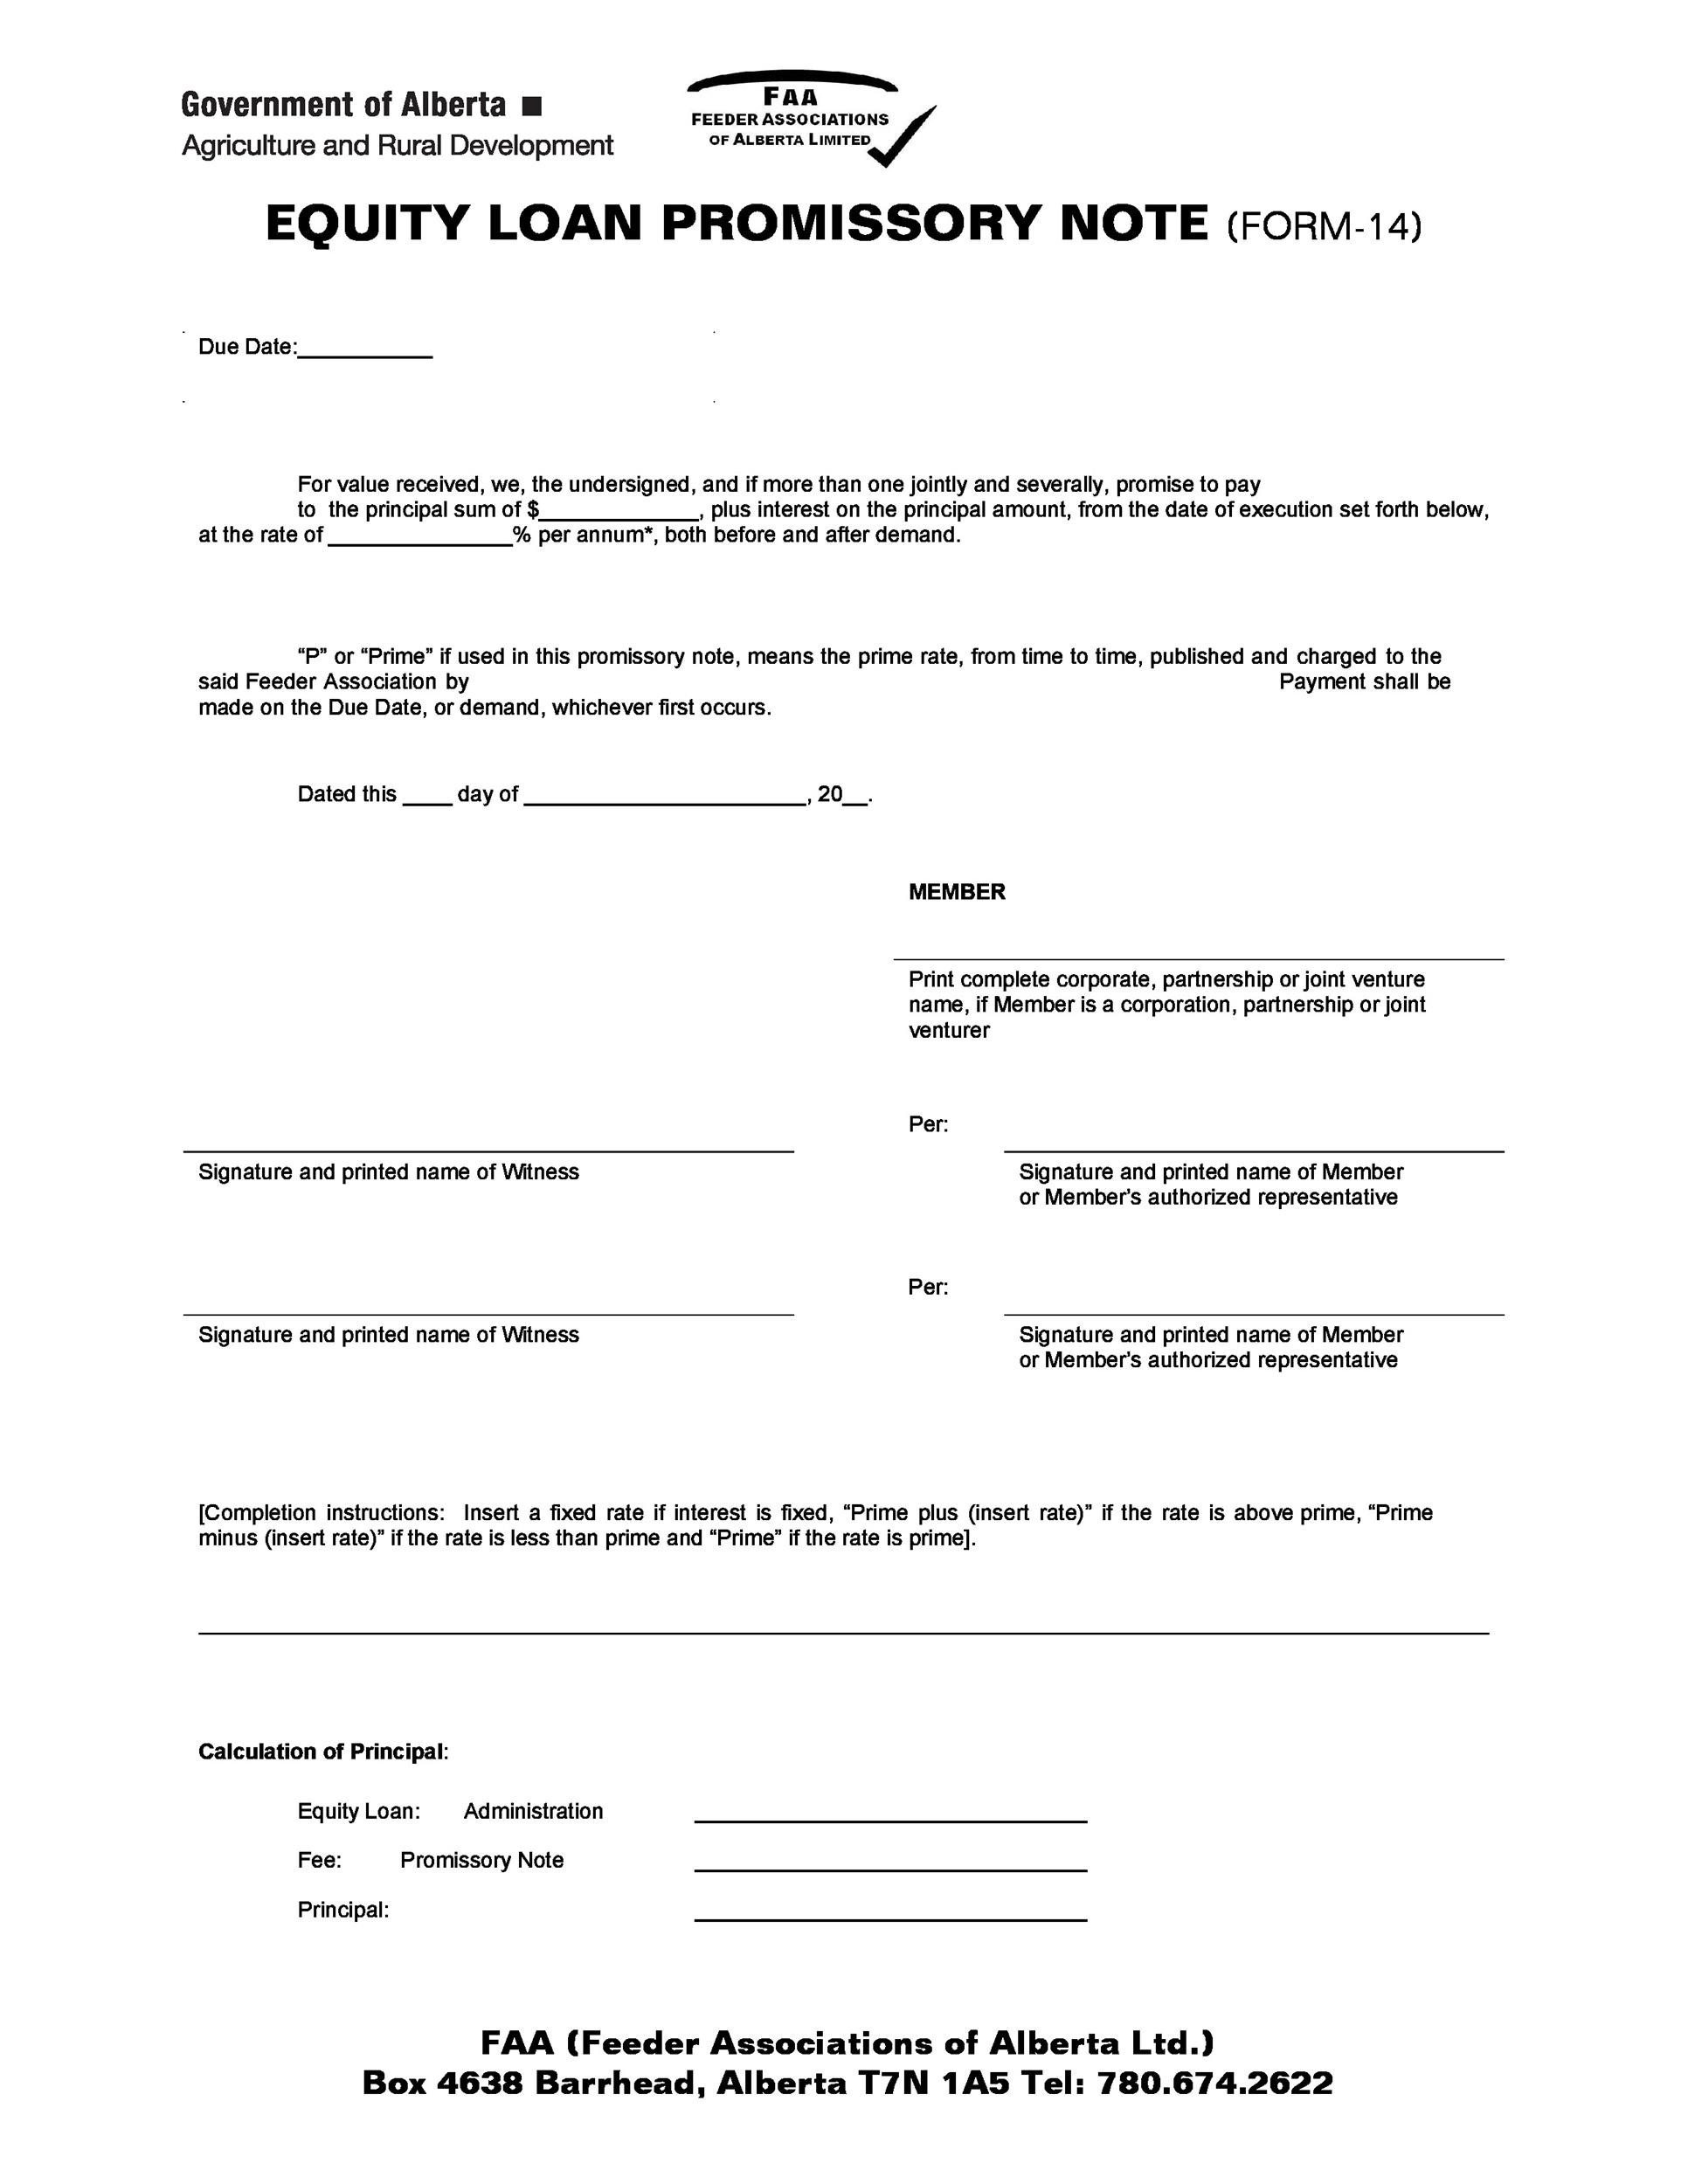 45 FREE Promissory Note Templates Forms Word PDF ᐅ TemplateLab